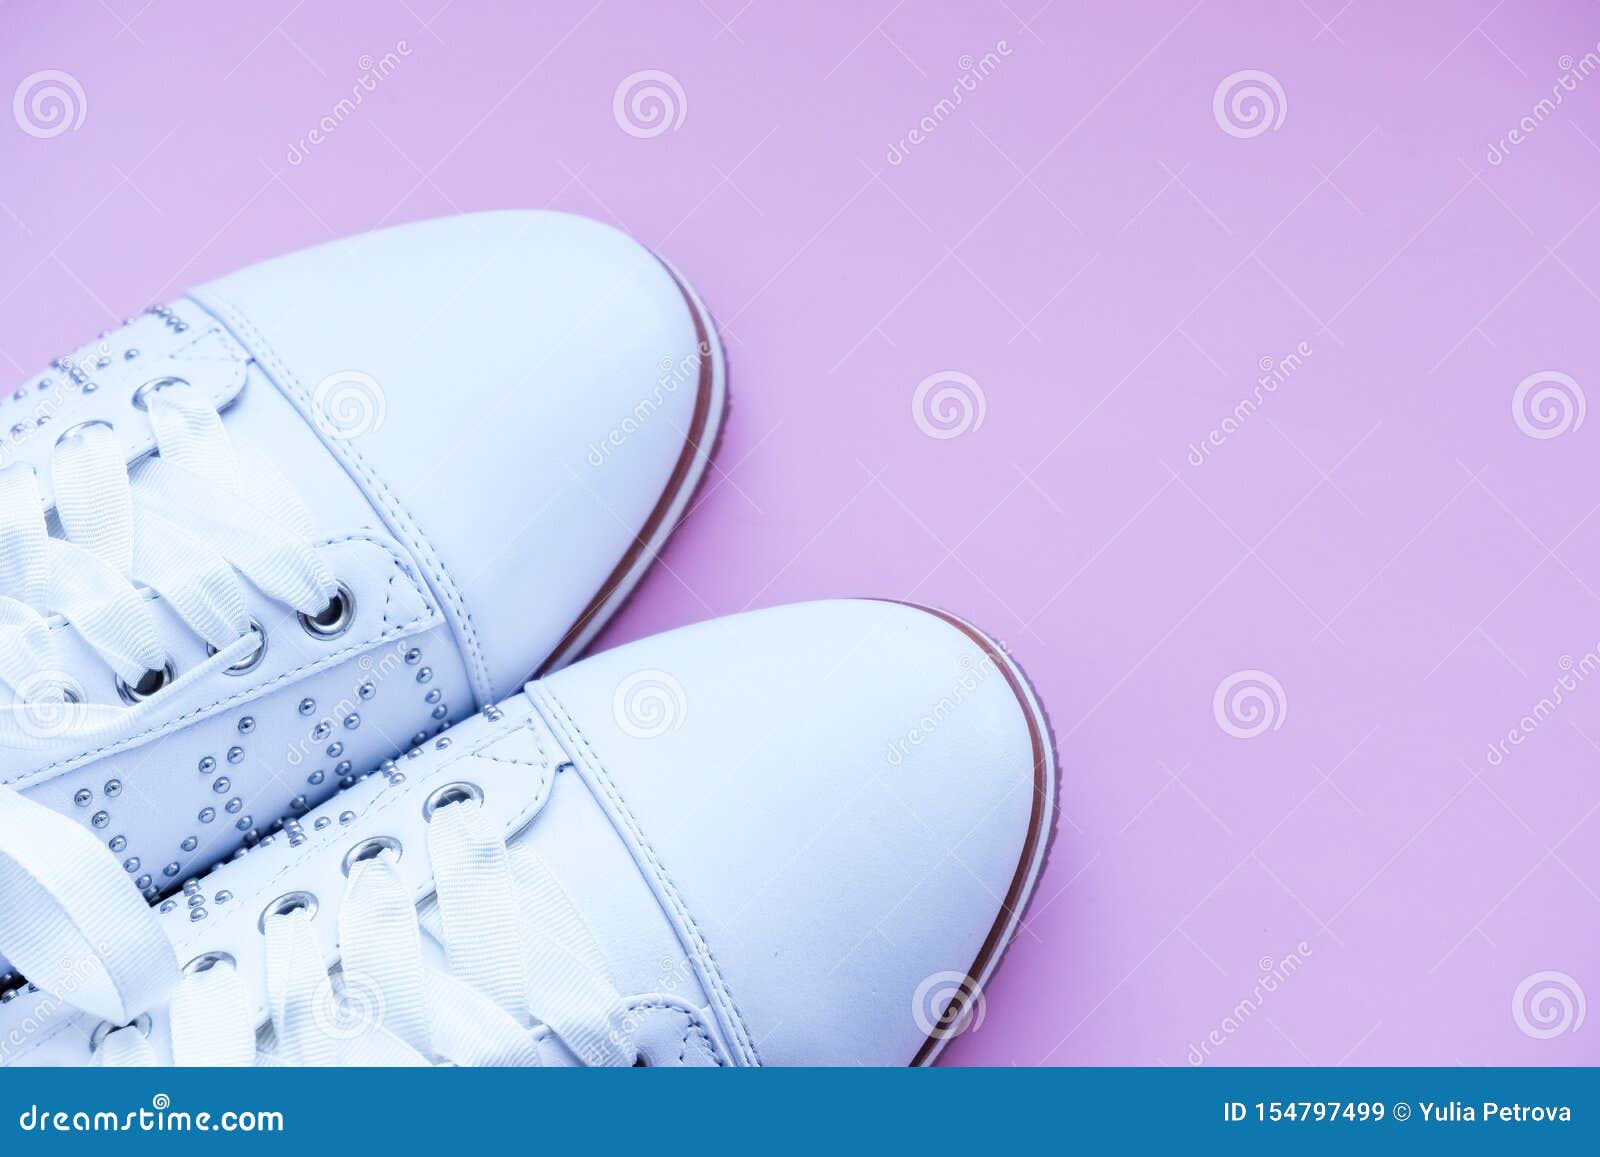 Shoes for Young Girl, Woman Fashion. White Leather Sneakers with Laces ...